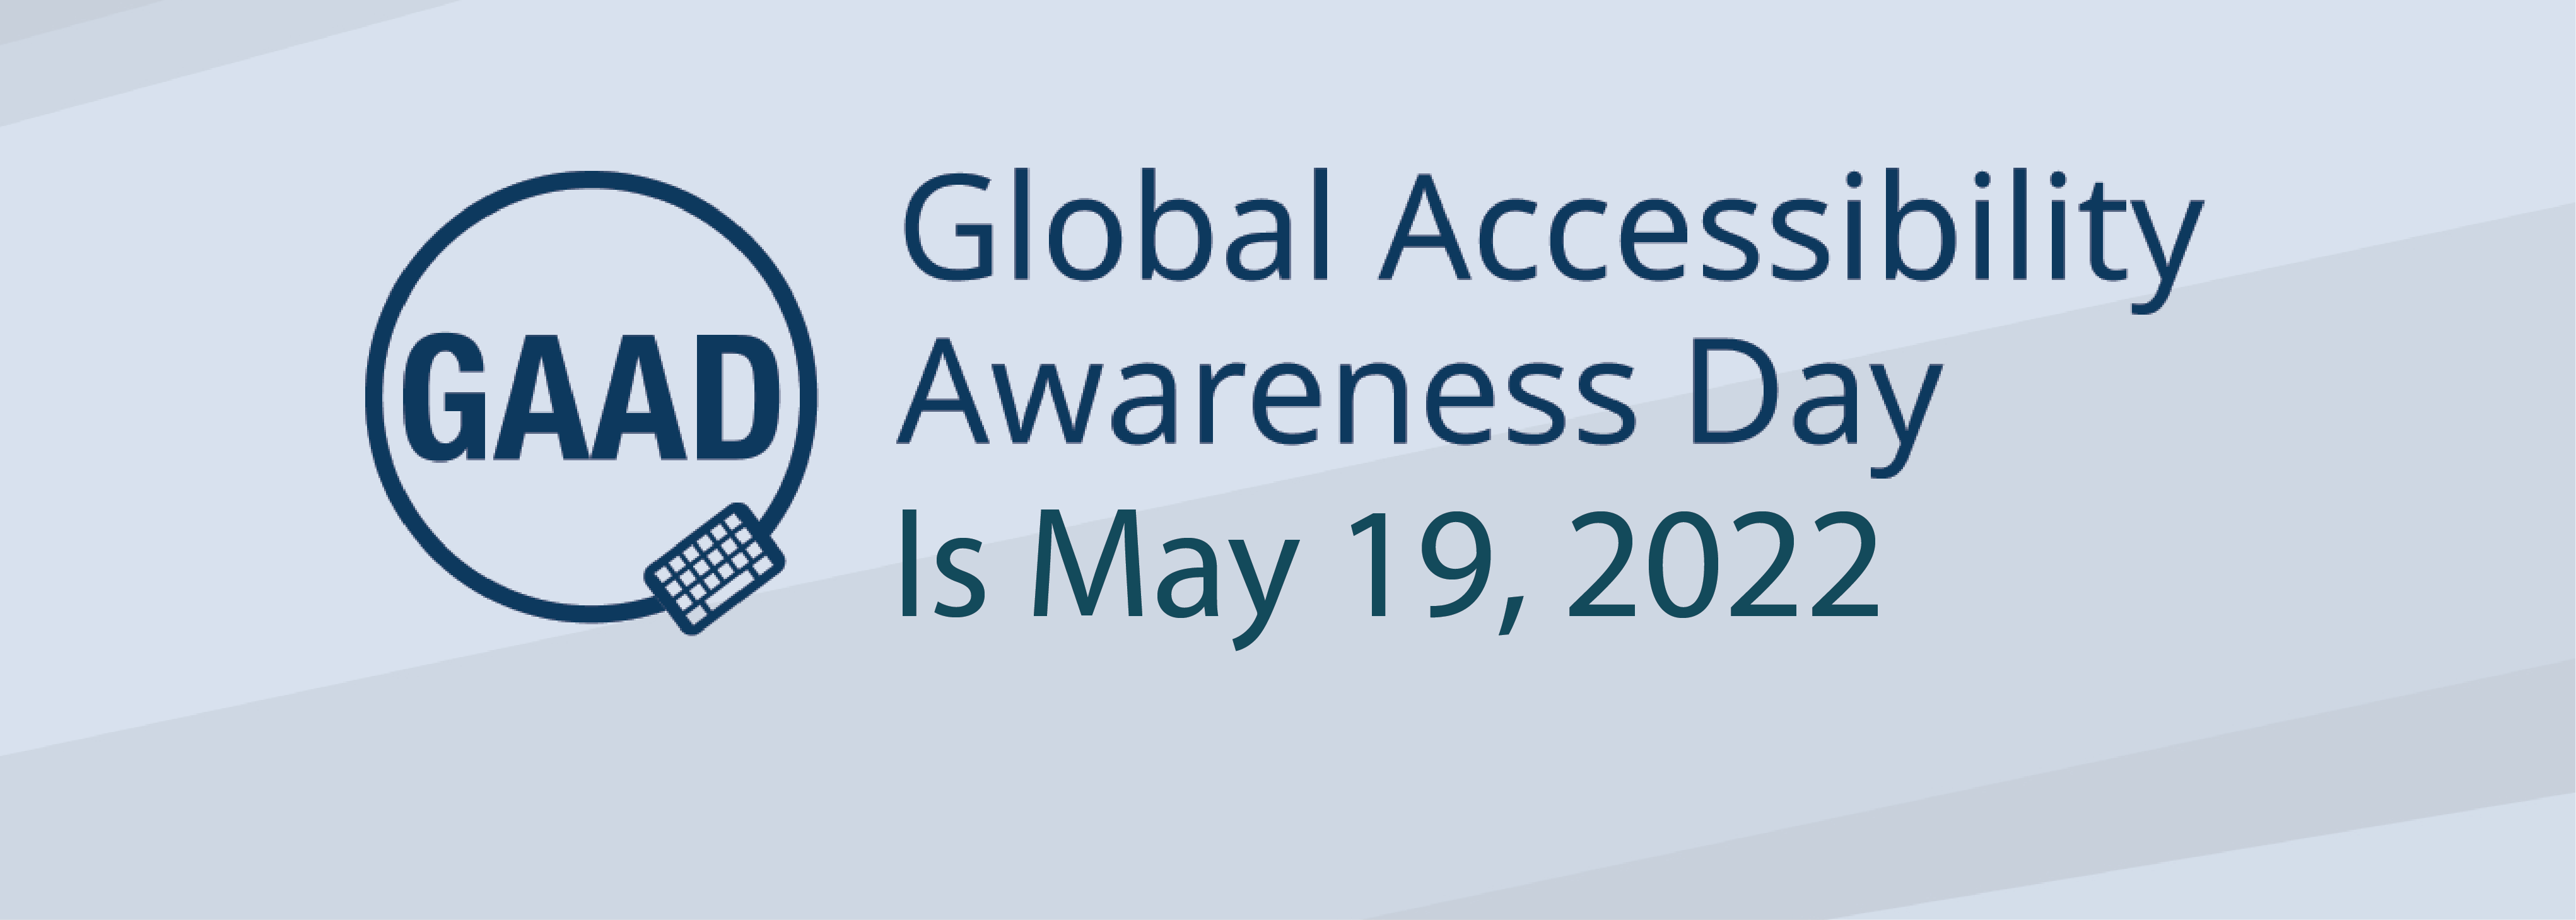 Global Accessibility Awareness Day Logo 